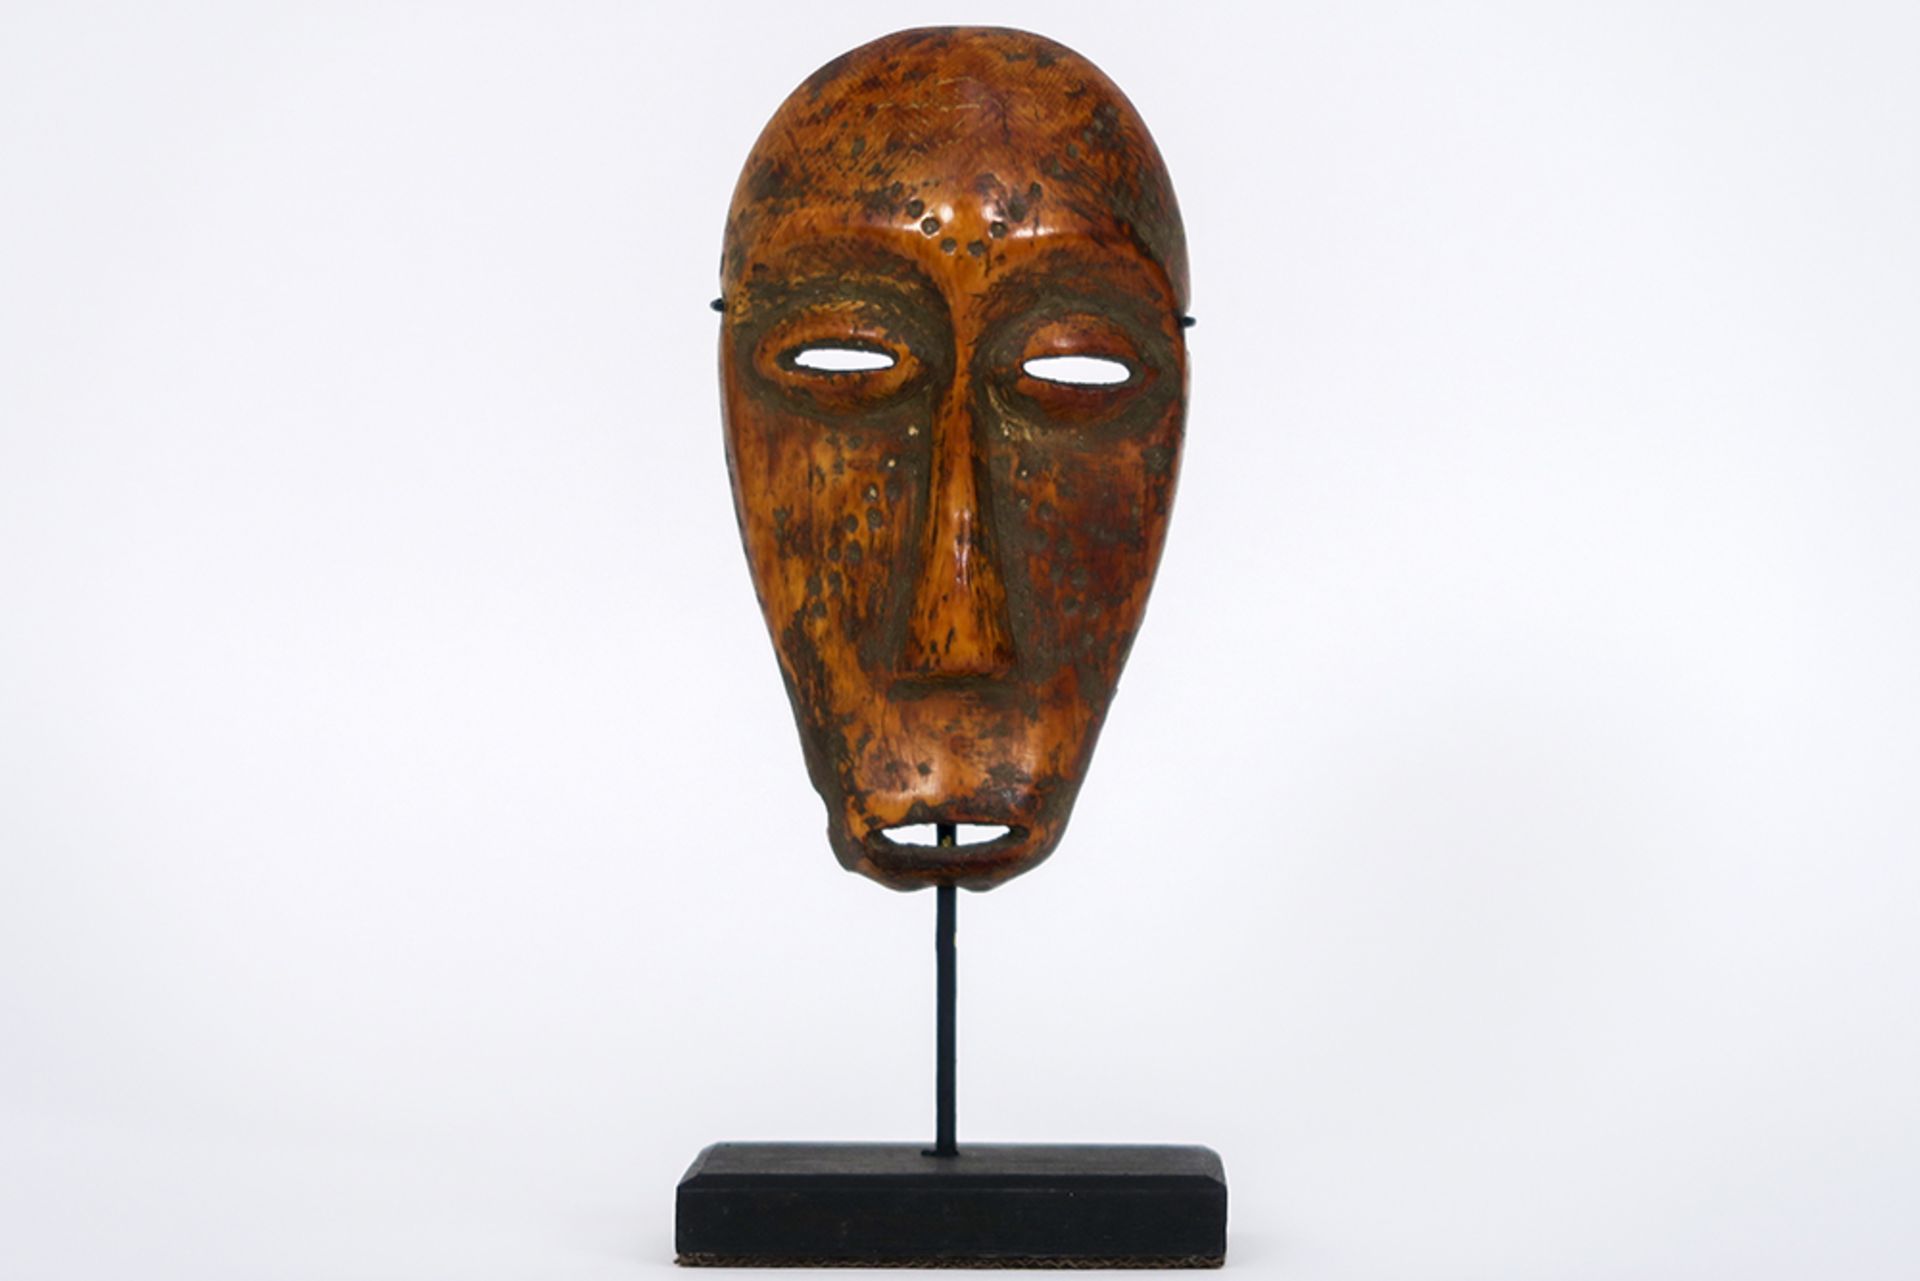 characteristic 1st half of the 20th Cent. African Congolese ivory "Lega" mask || AFRIKA - KONGO - 1°